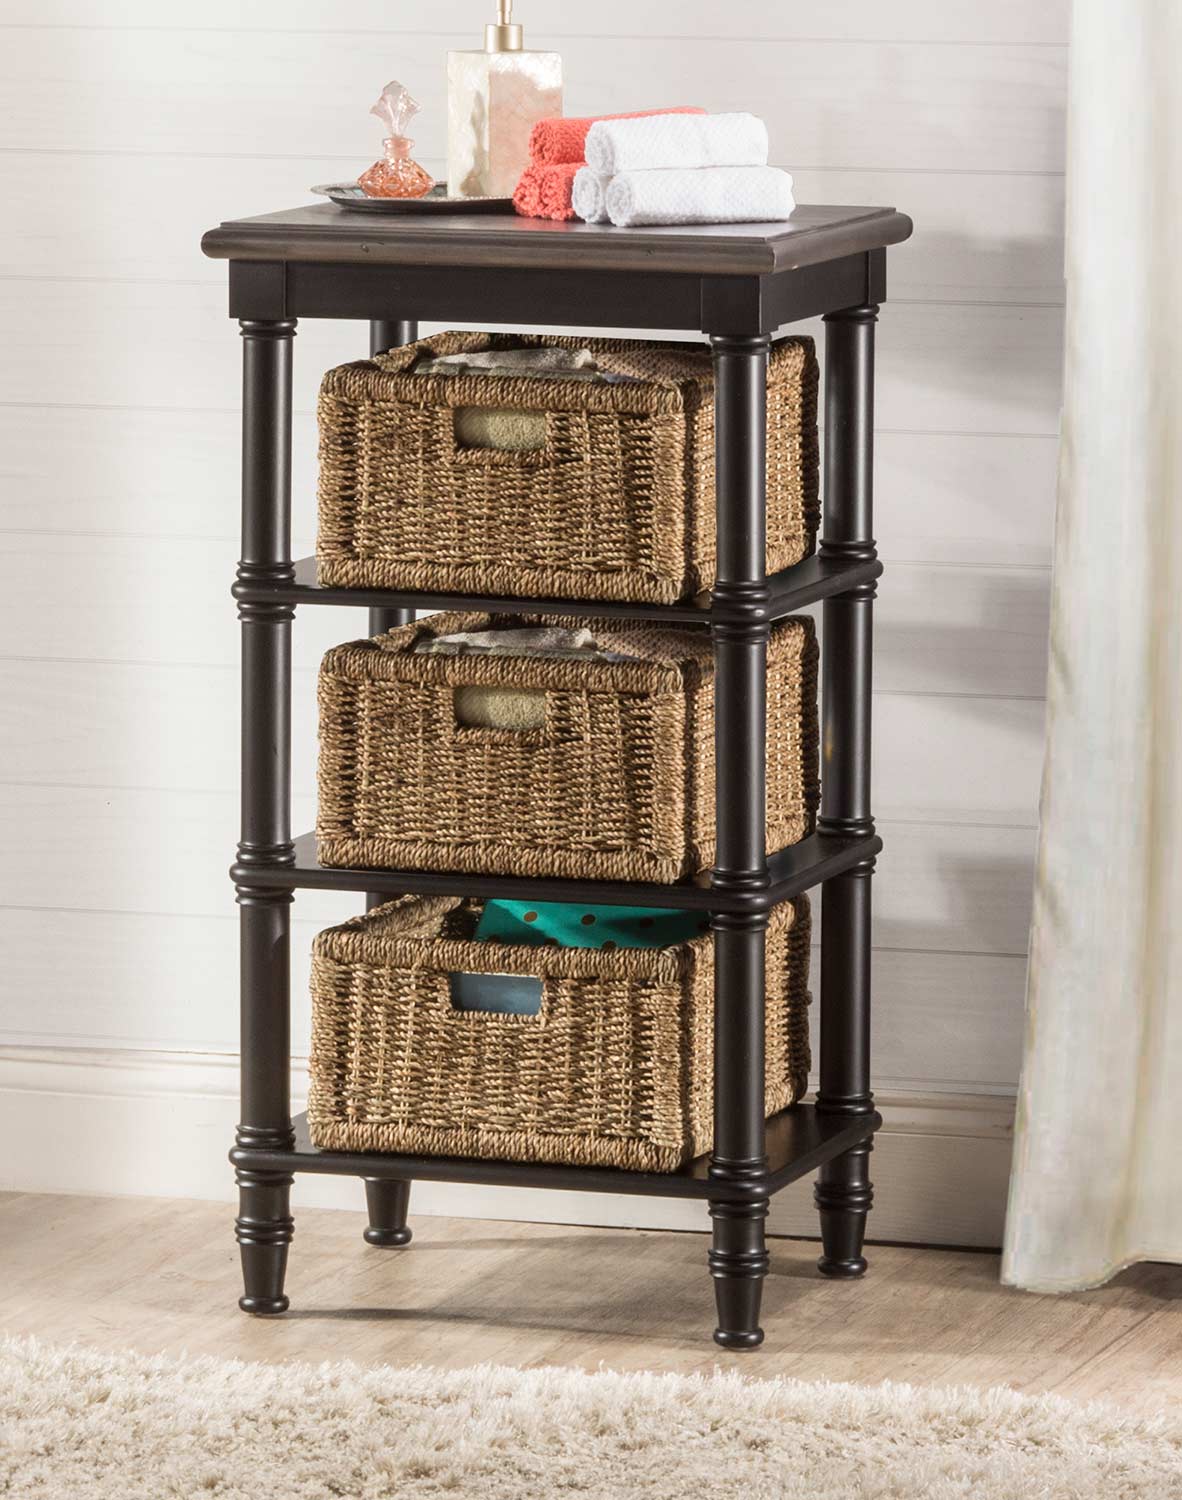 Hillsdale Seneca Basket Stand with 3 Baskets - Waxed Black/Walnut/Natural Seagrass